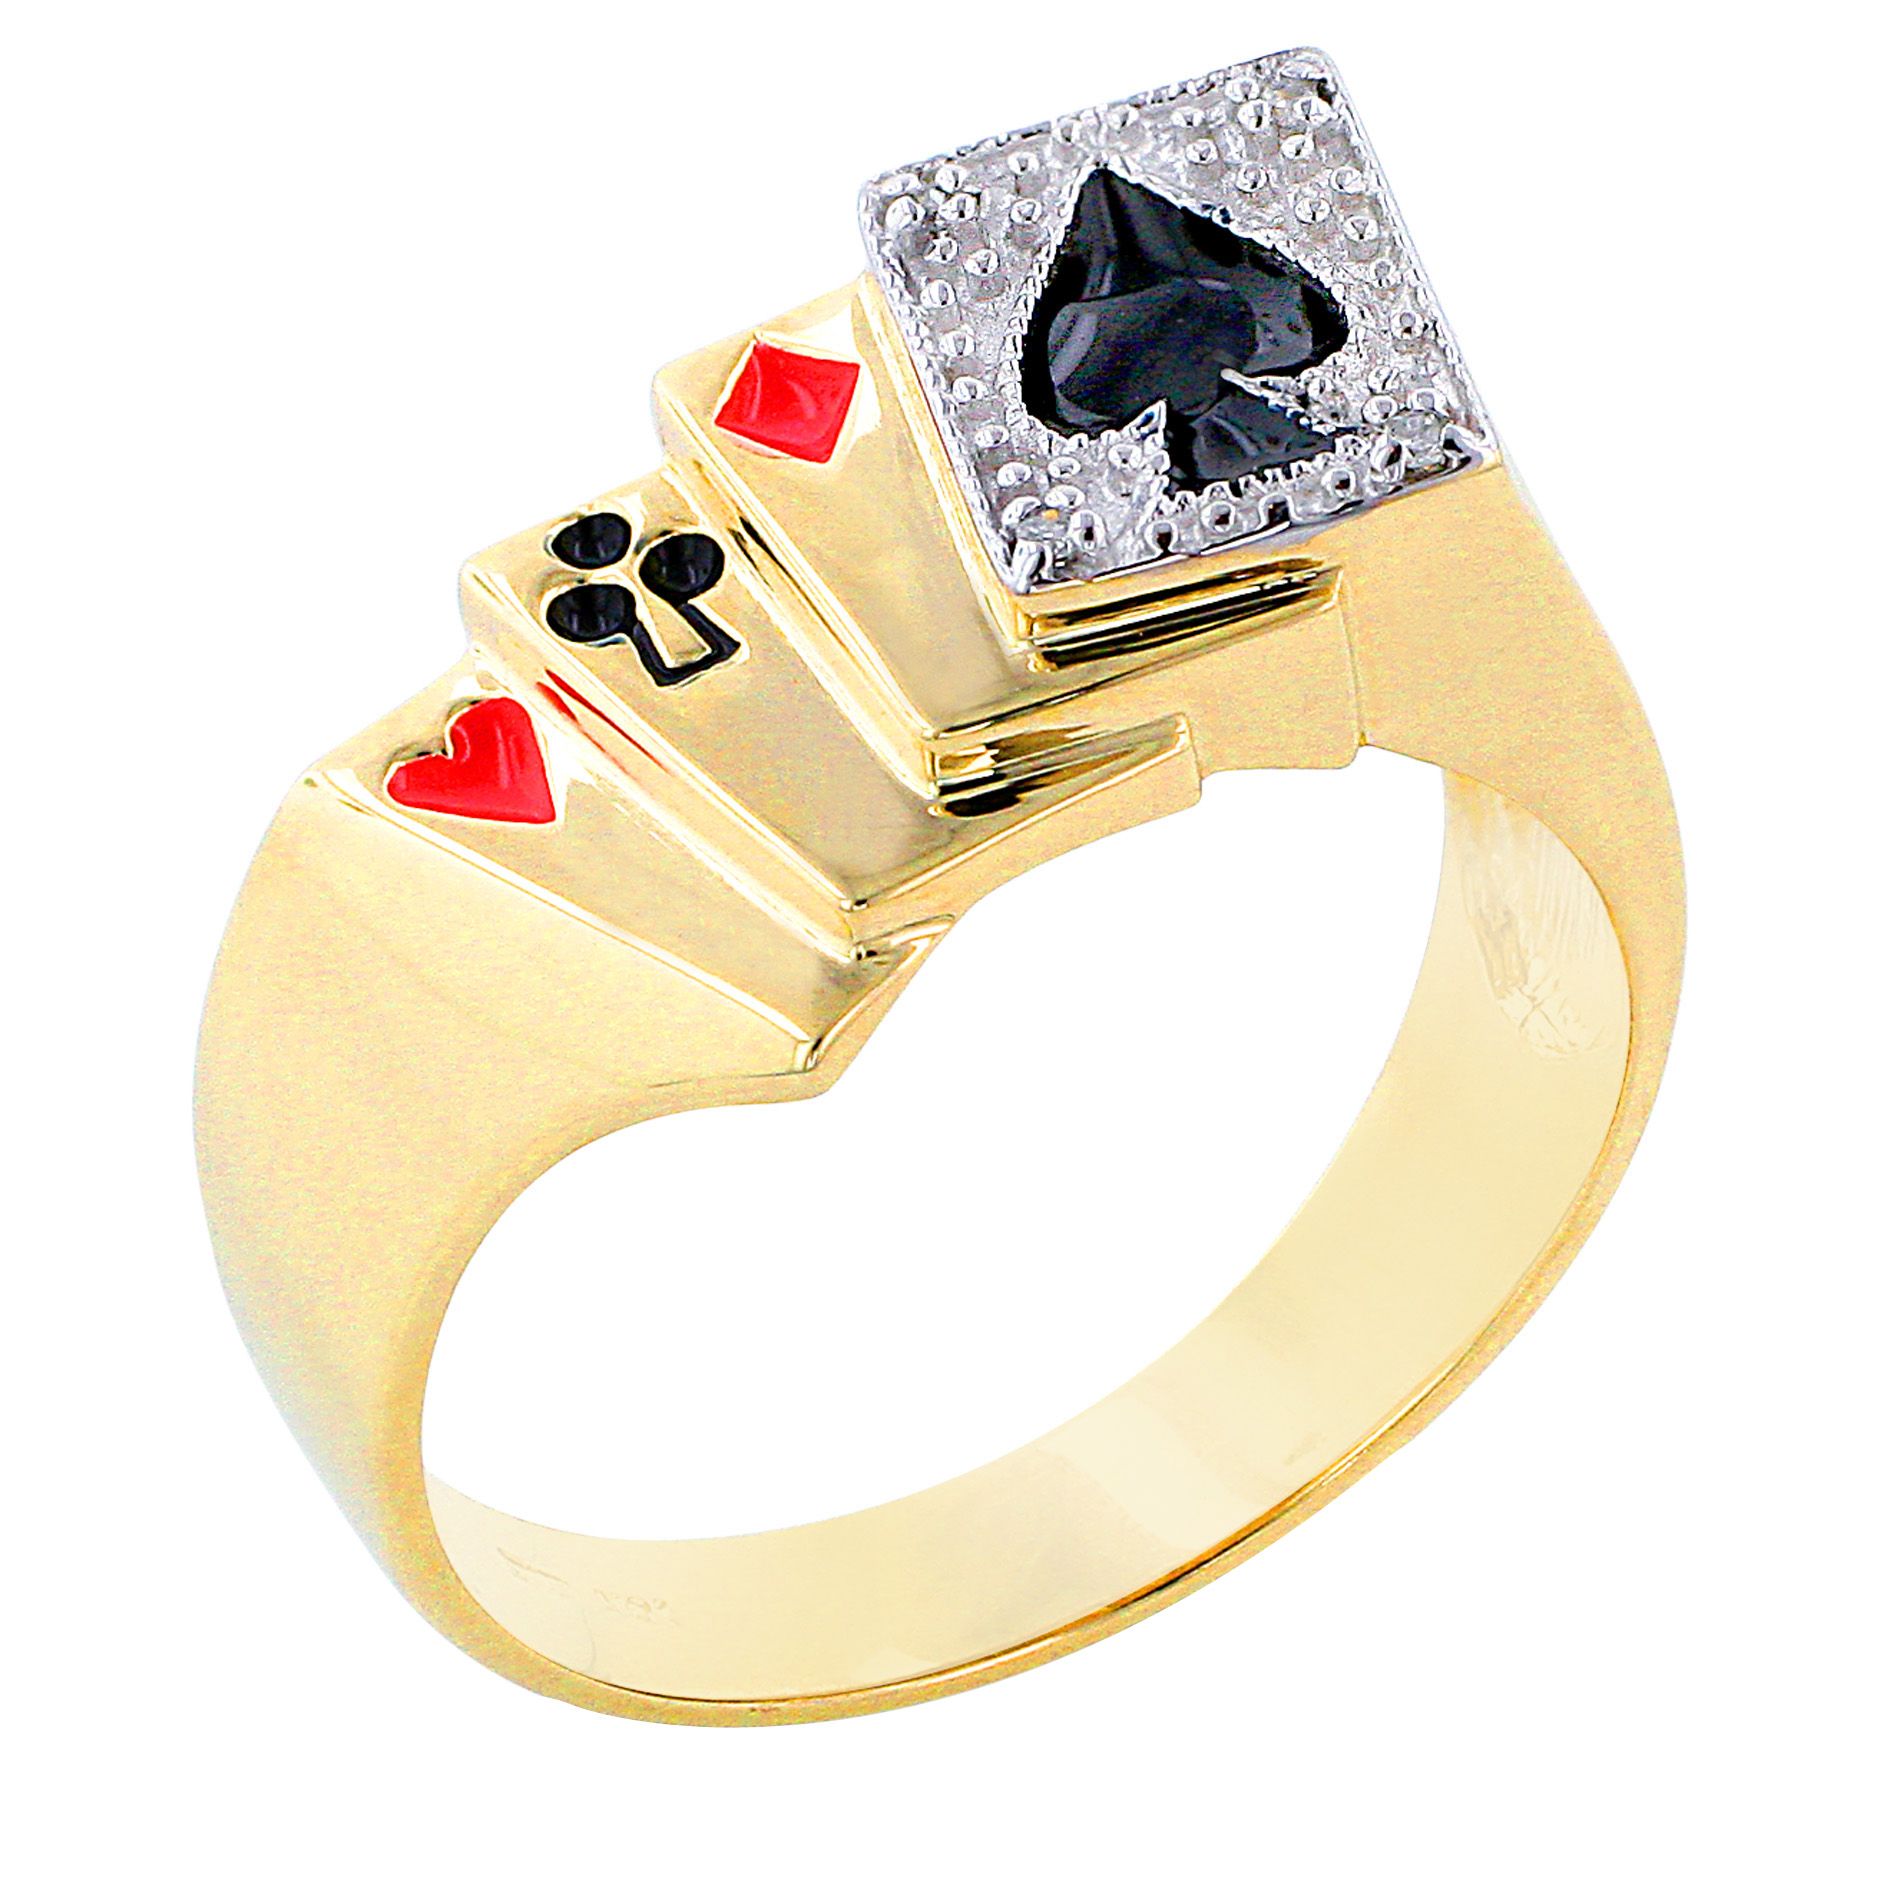 CLEARANCE! Mens Poker Ring with Diamond Accents